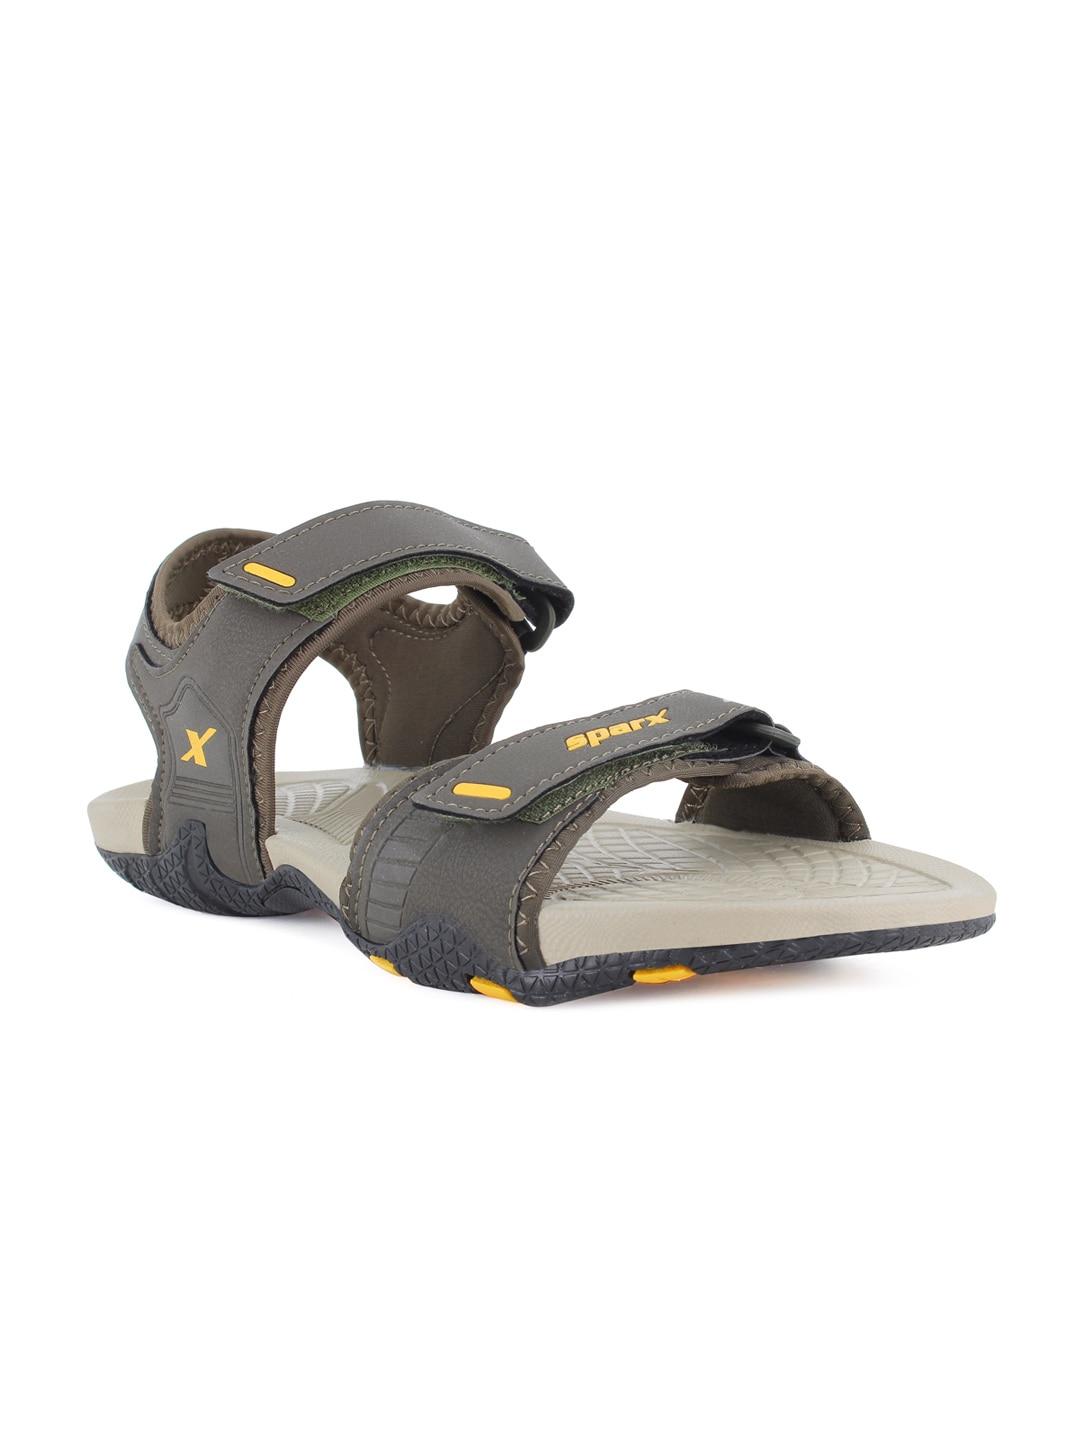 sparx-men-olive-green-&-yellow-sports-sandals